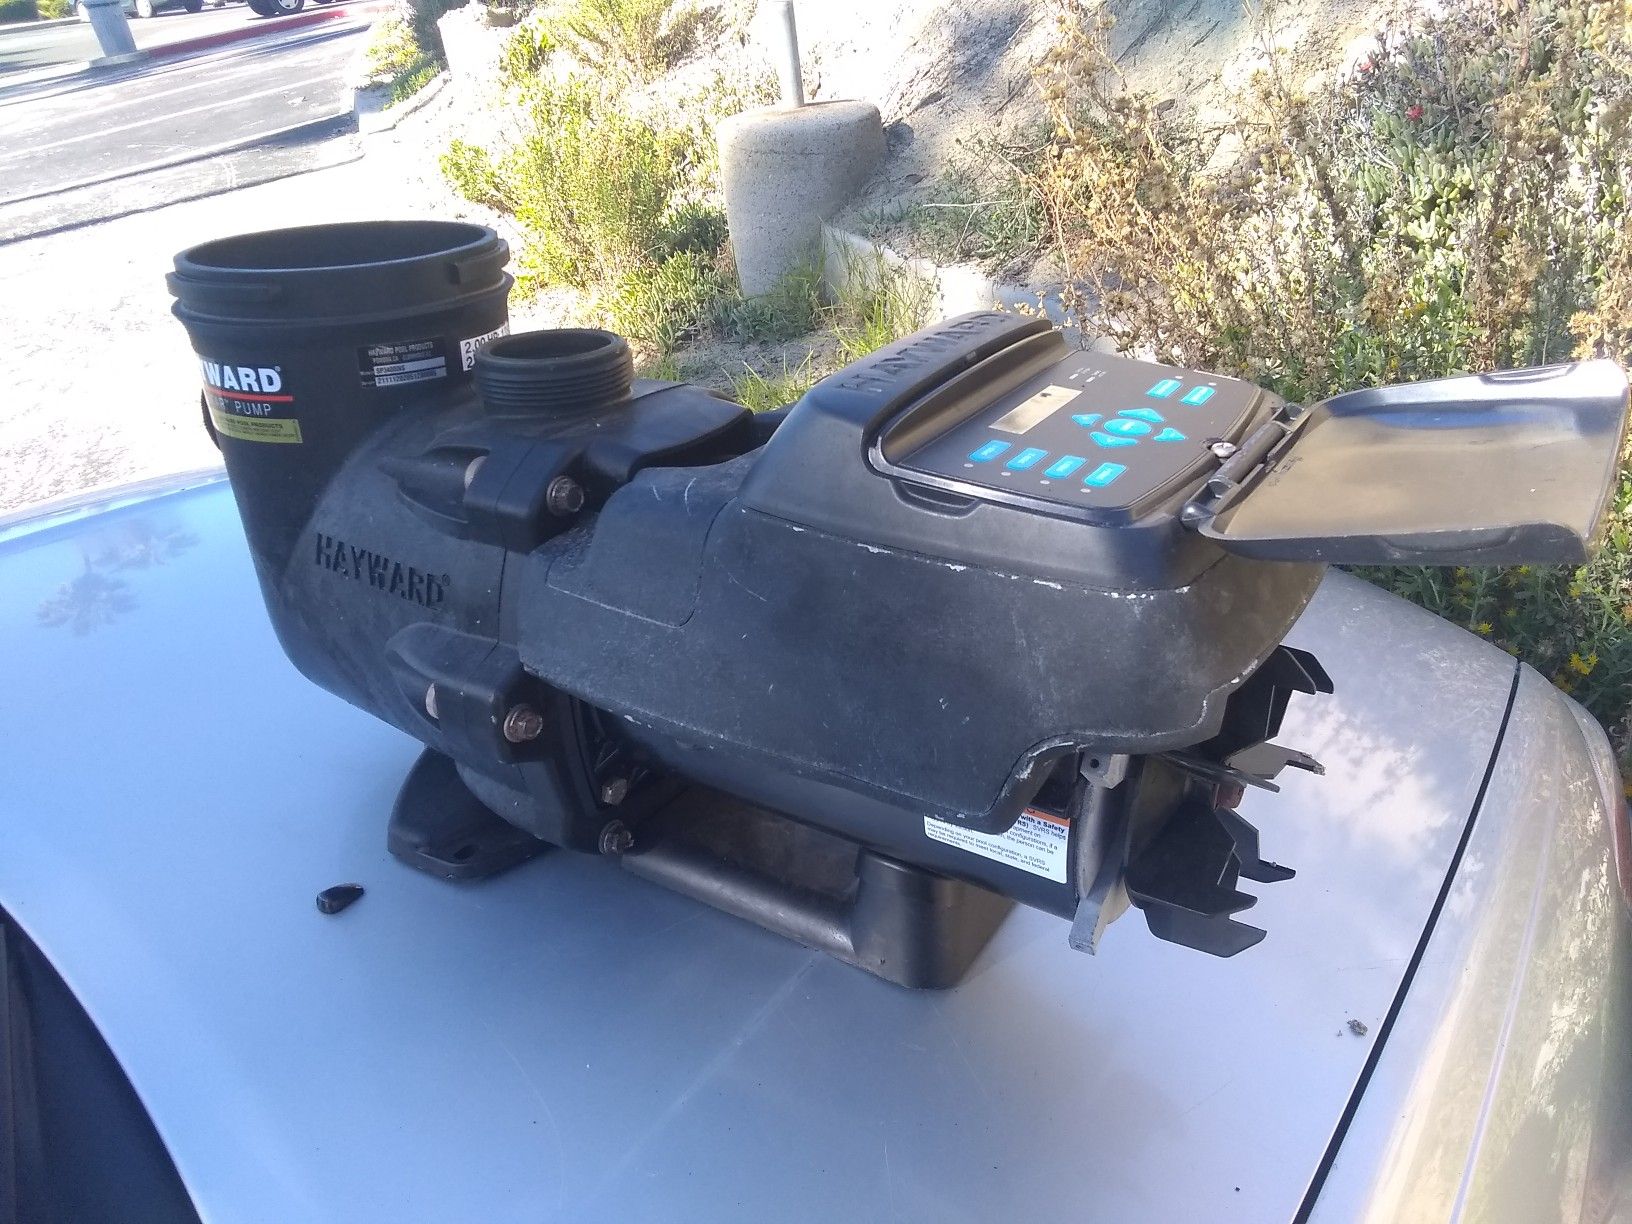 Hayward EcoStar pool pump $400 pump and motor housing just needs new replacement motor (250 approx motor replacement cost)